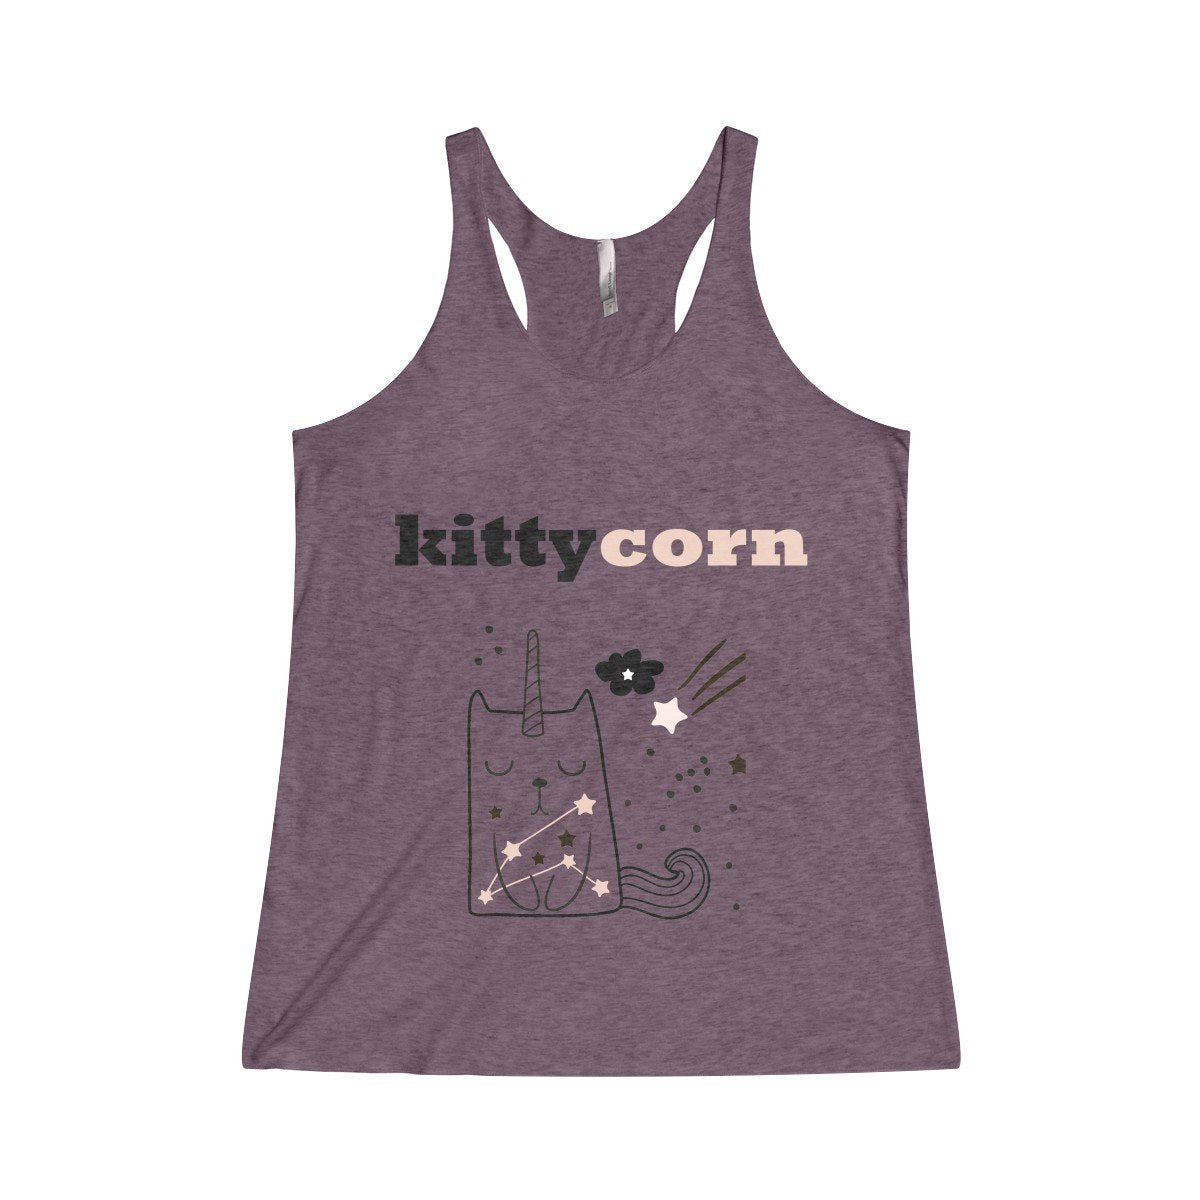 If you're looking for tops with cats on them, pick up this cute kittycorn tank top featuring a unicorn cat printed on the front.